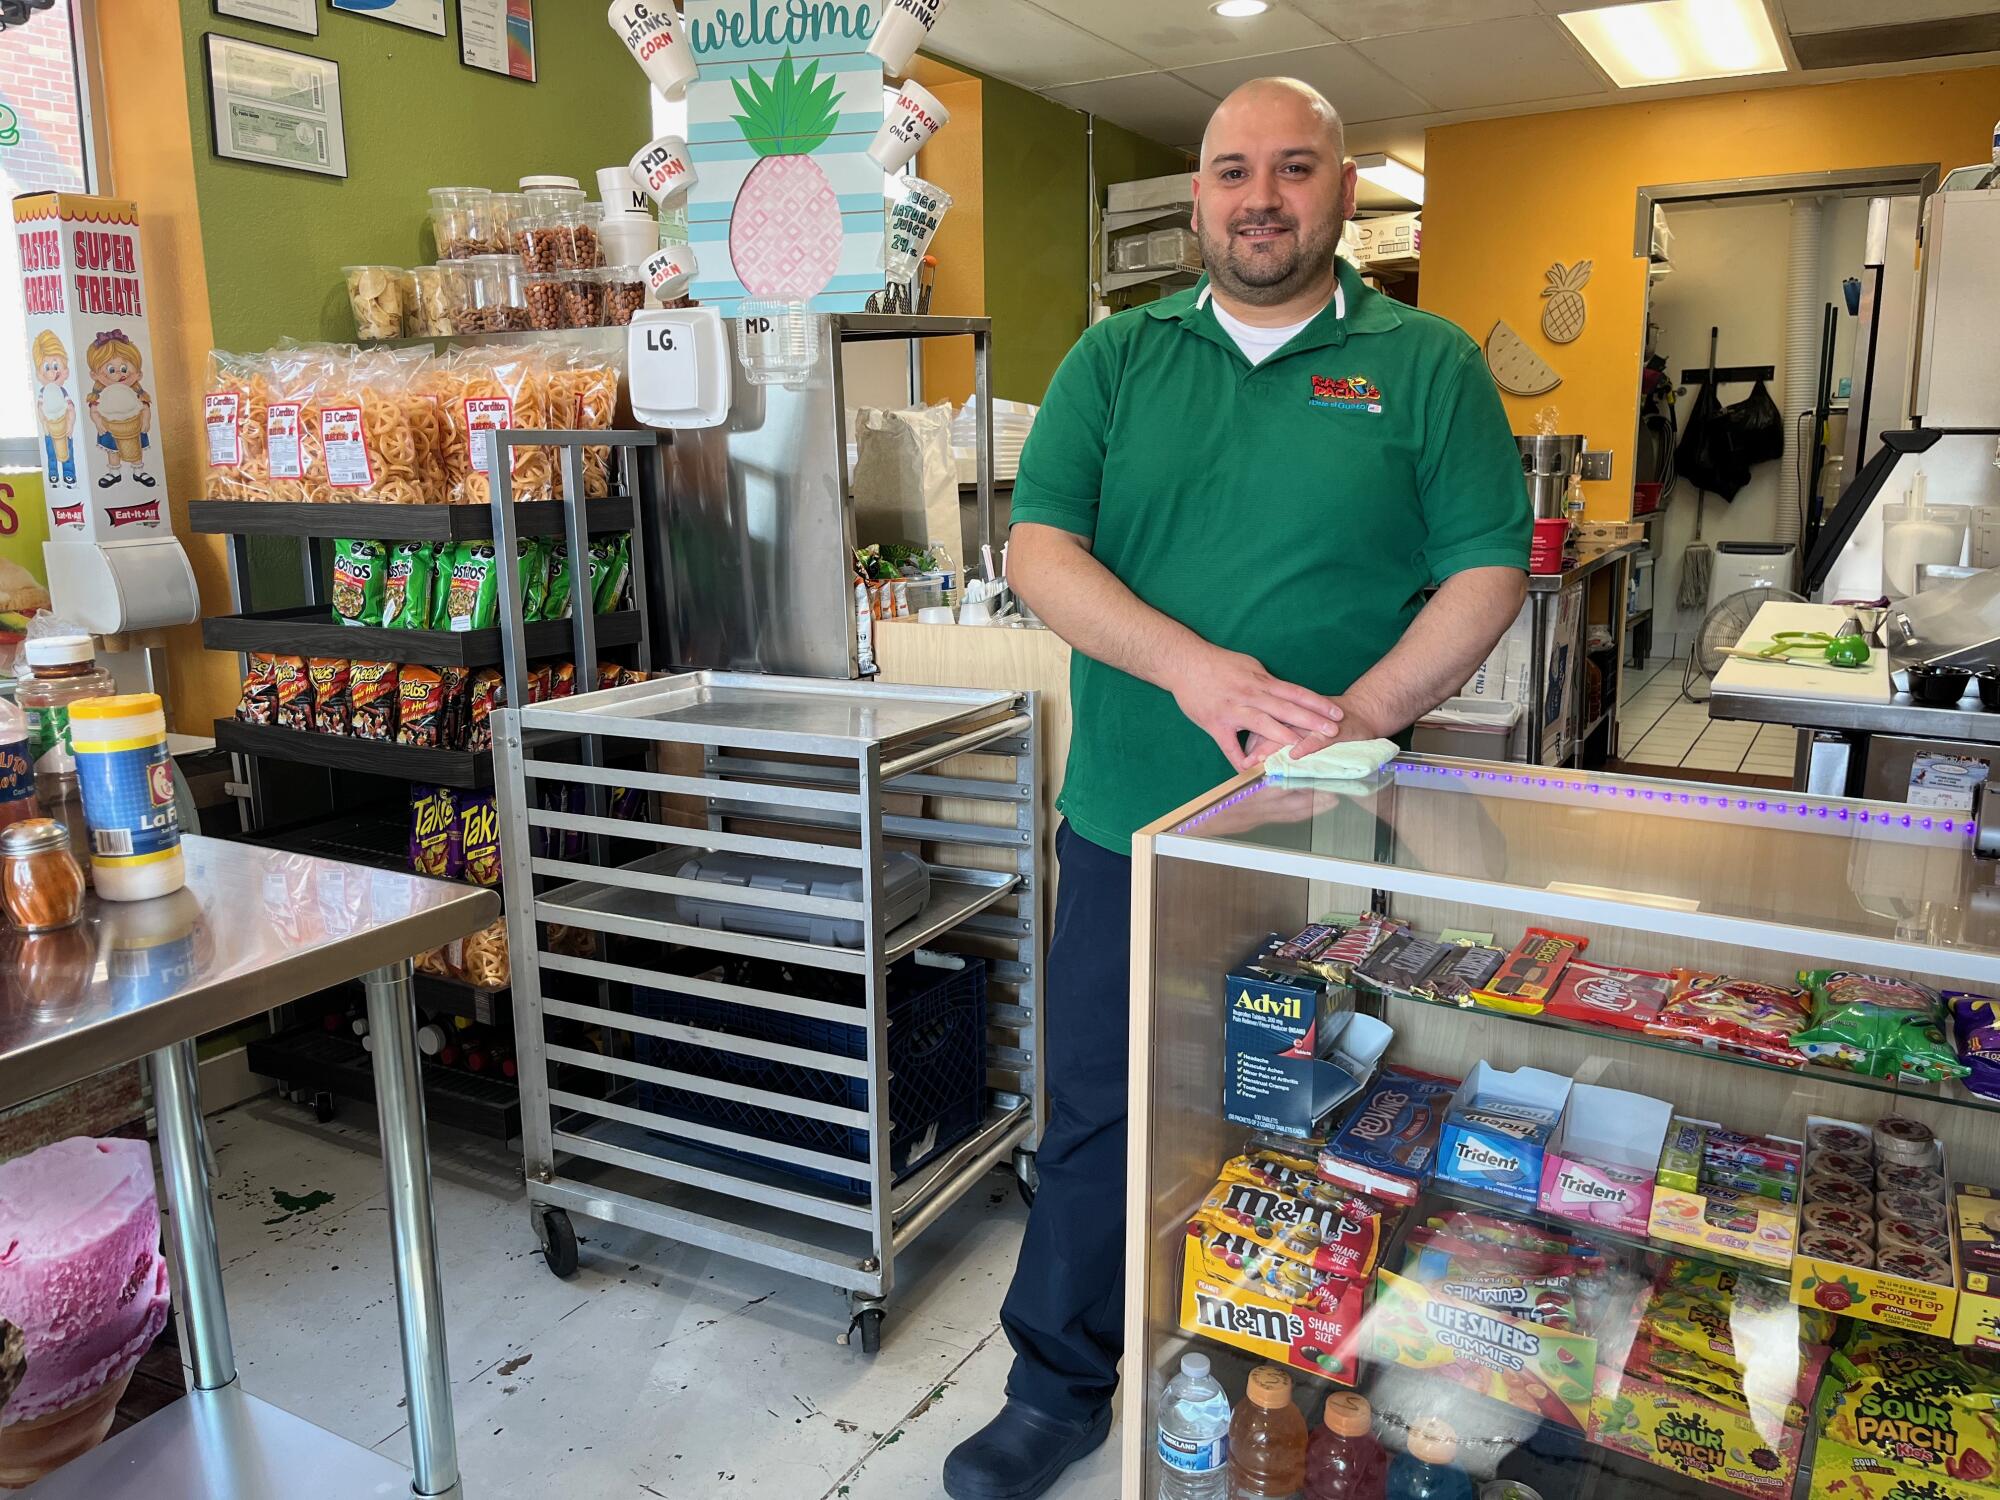 A man in a green shirt stands inside a shop with candy and snacks.